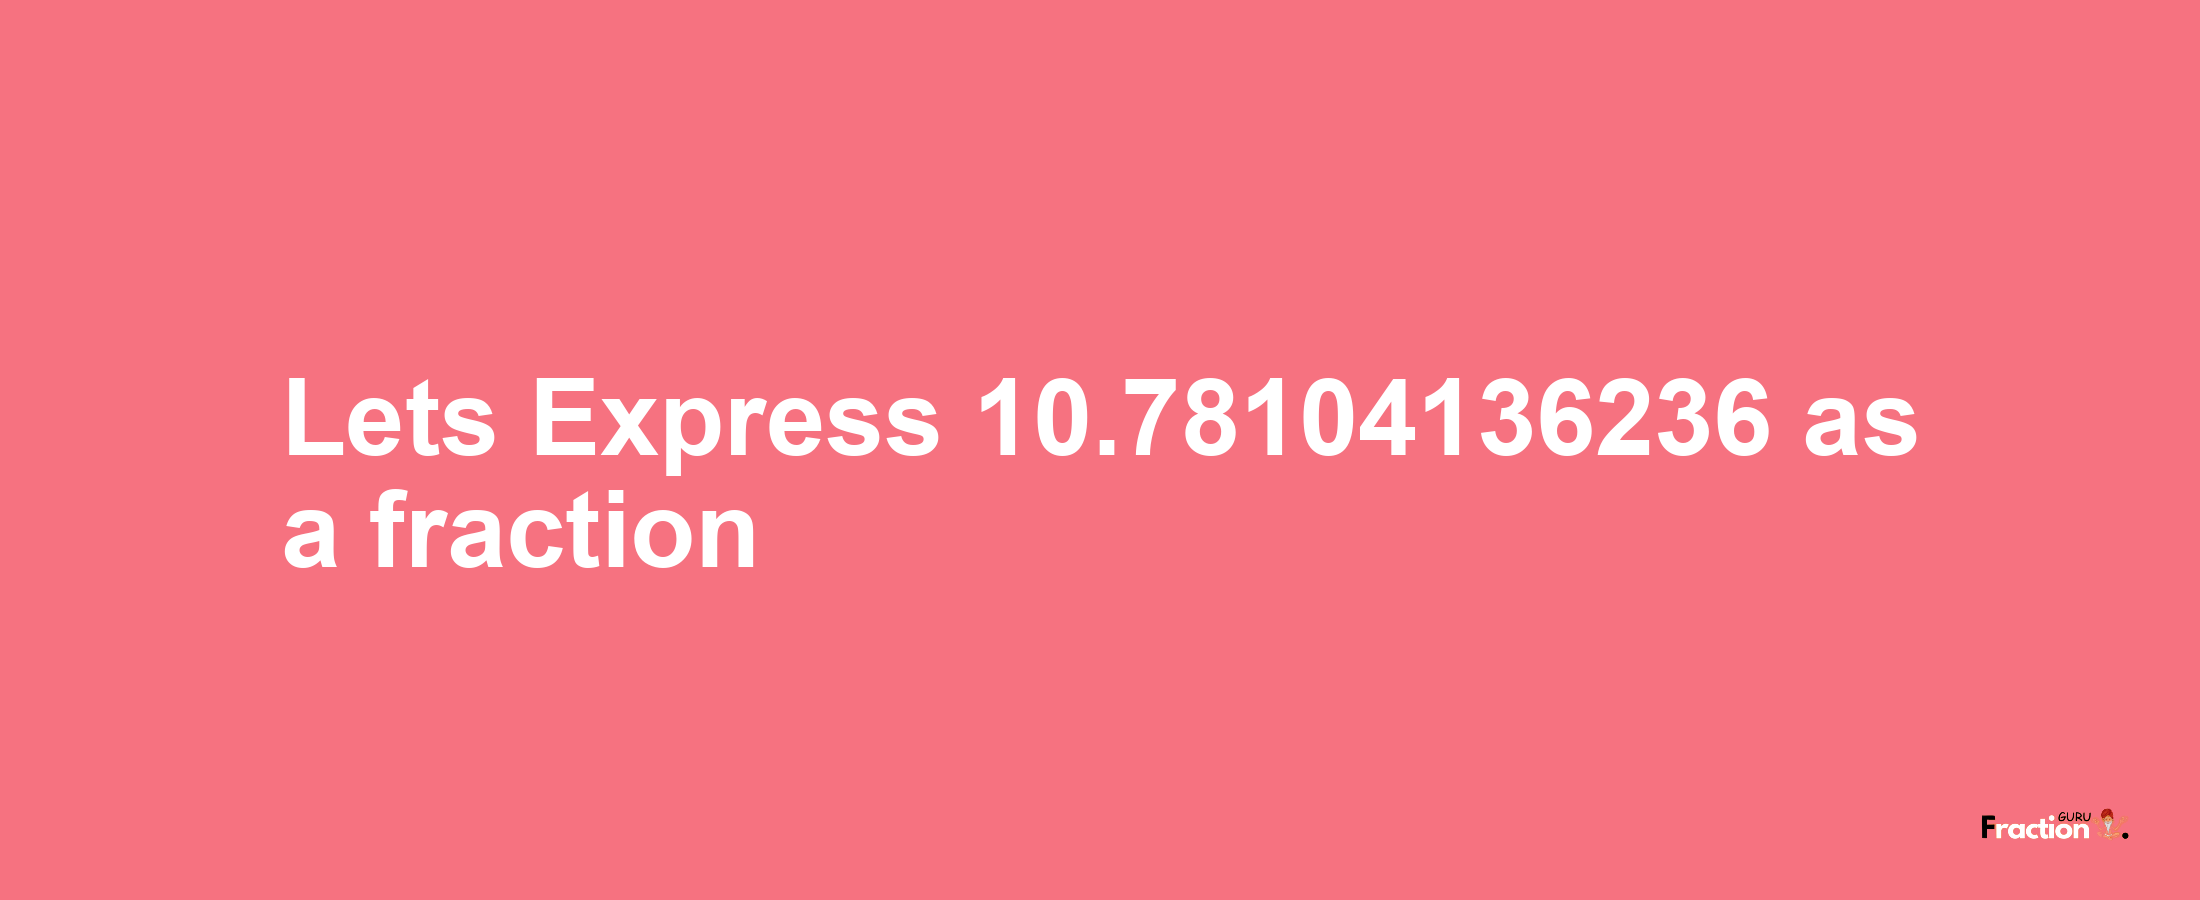 Lets Express 10.78104136236 as afraction